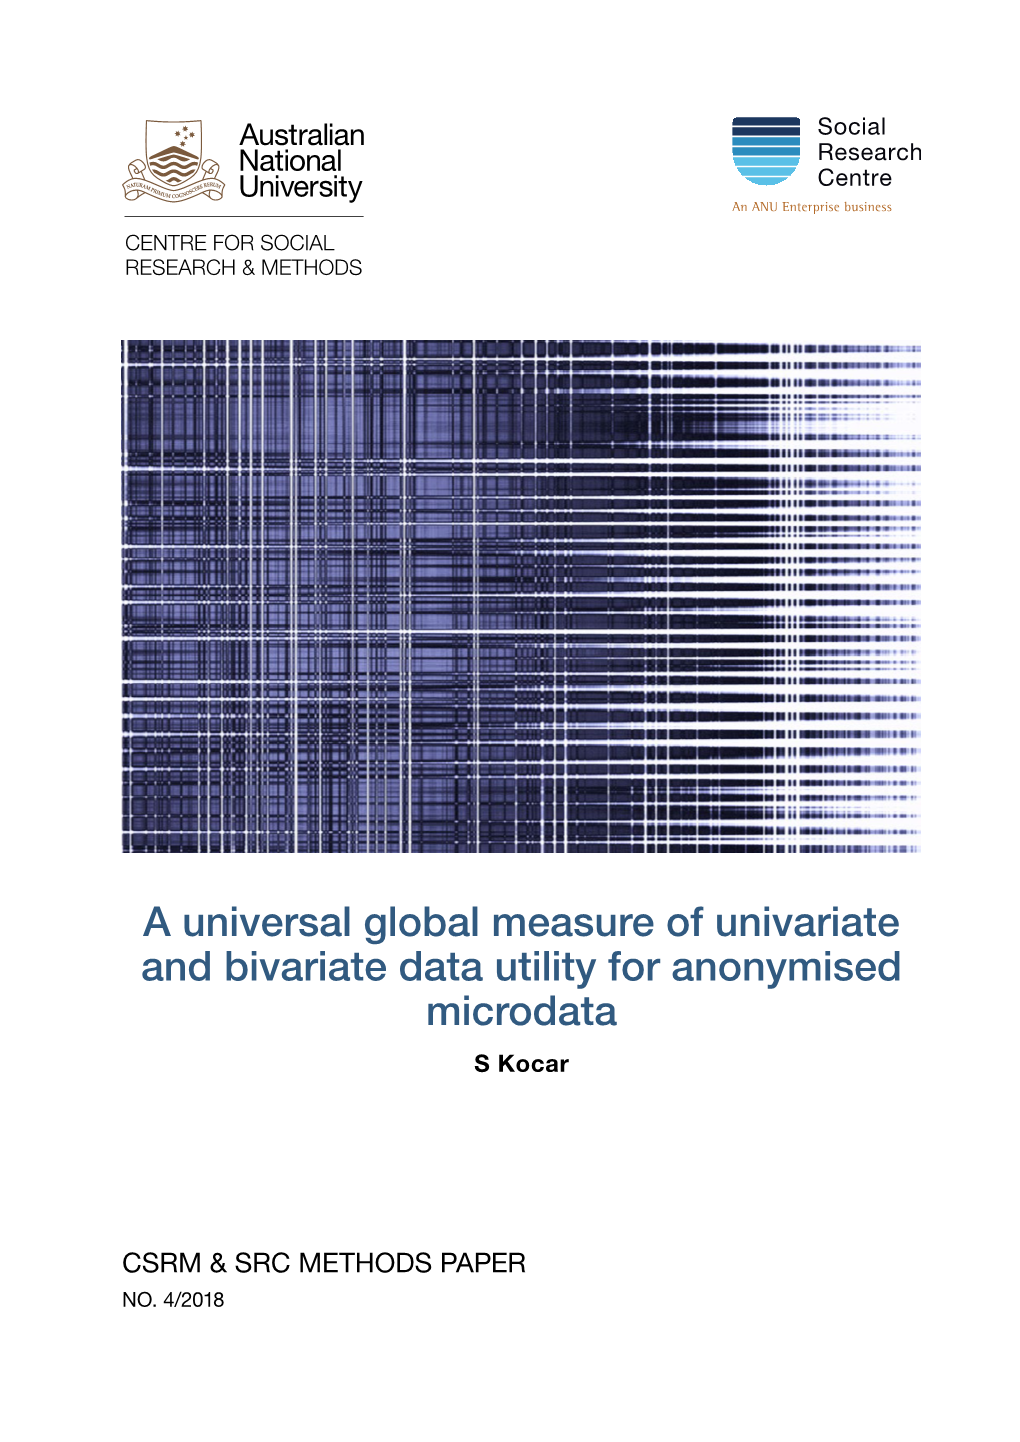 A Universal Global Measure of Univariate and Bivariate Data Utility for Anonymised Microdata S Kocar